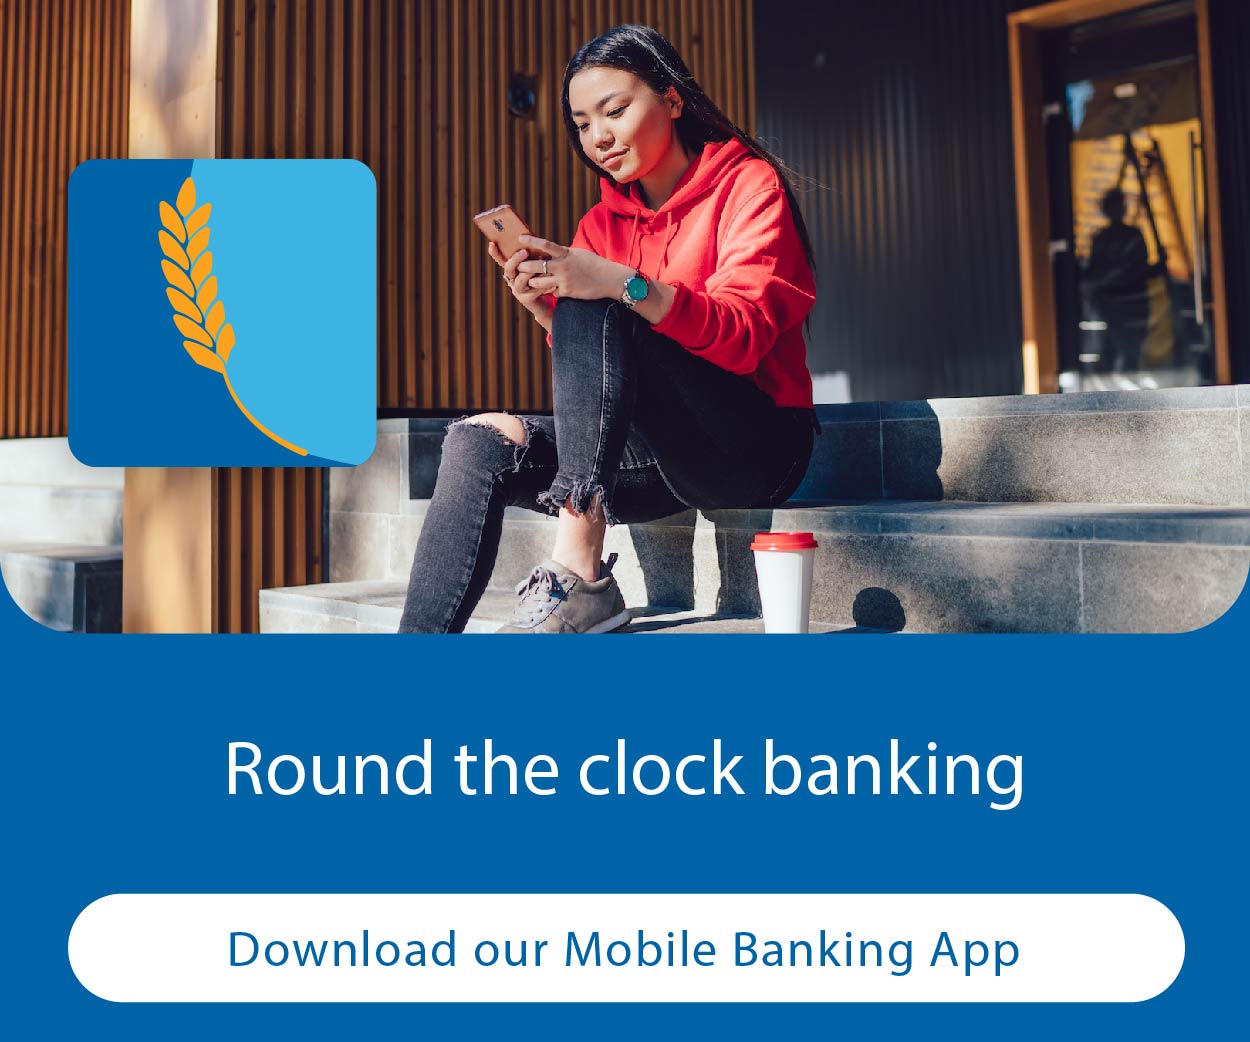 Mobile Banking Ad